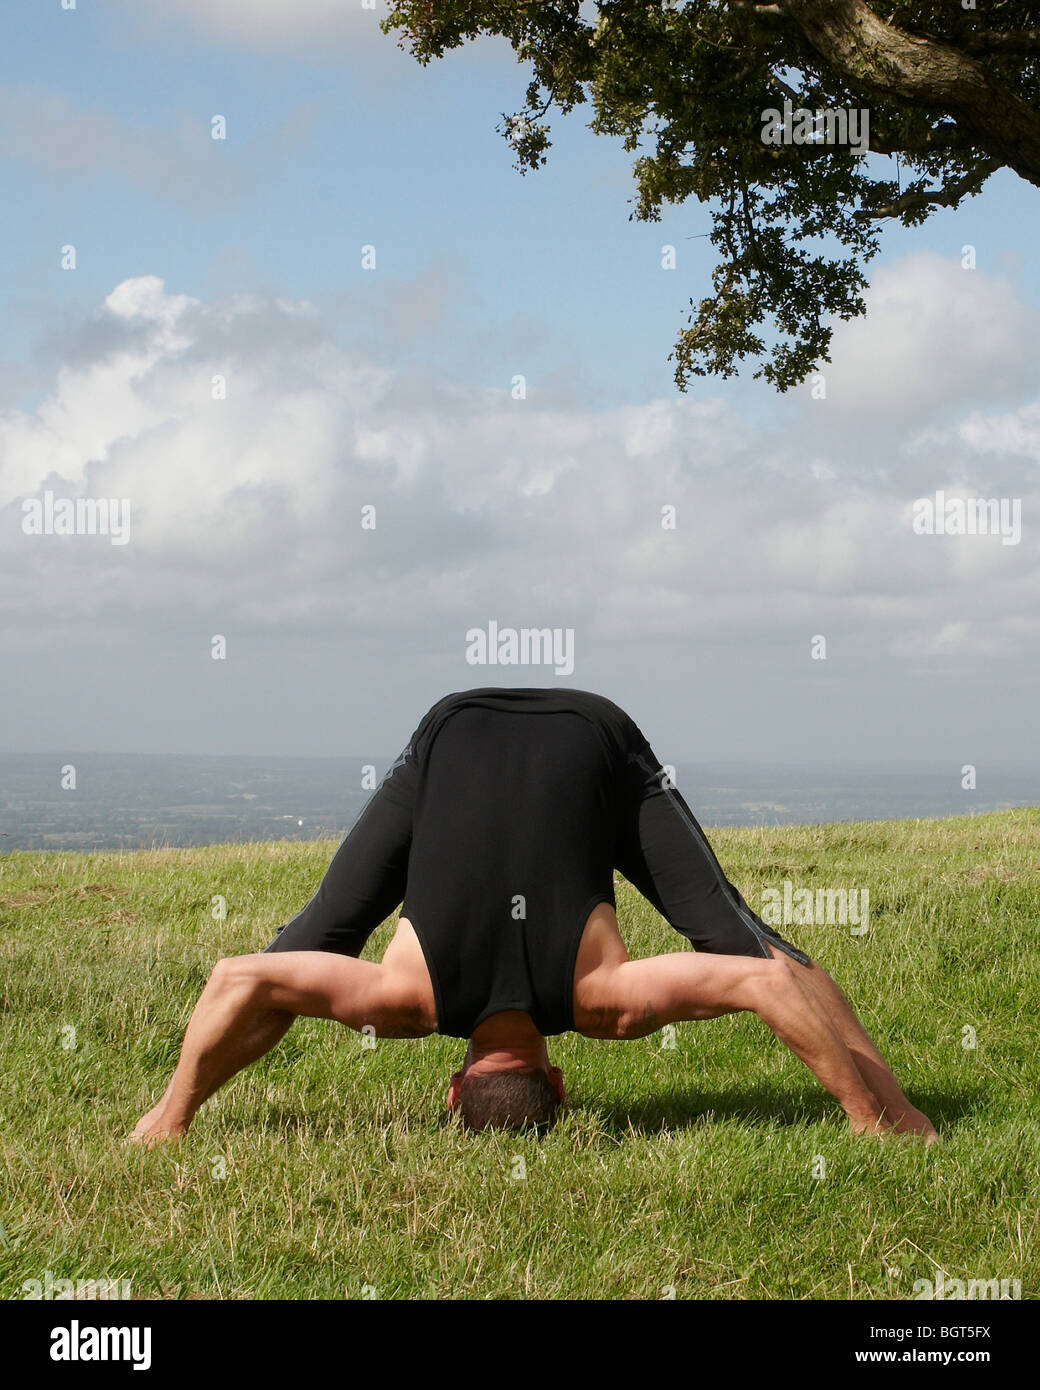 Man Doing Yoga On Hillside With View Of English Countryside Behind